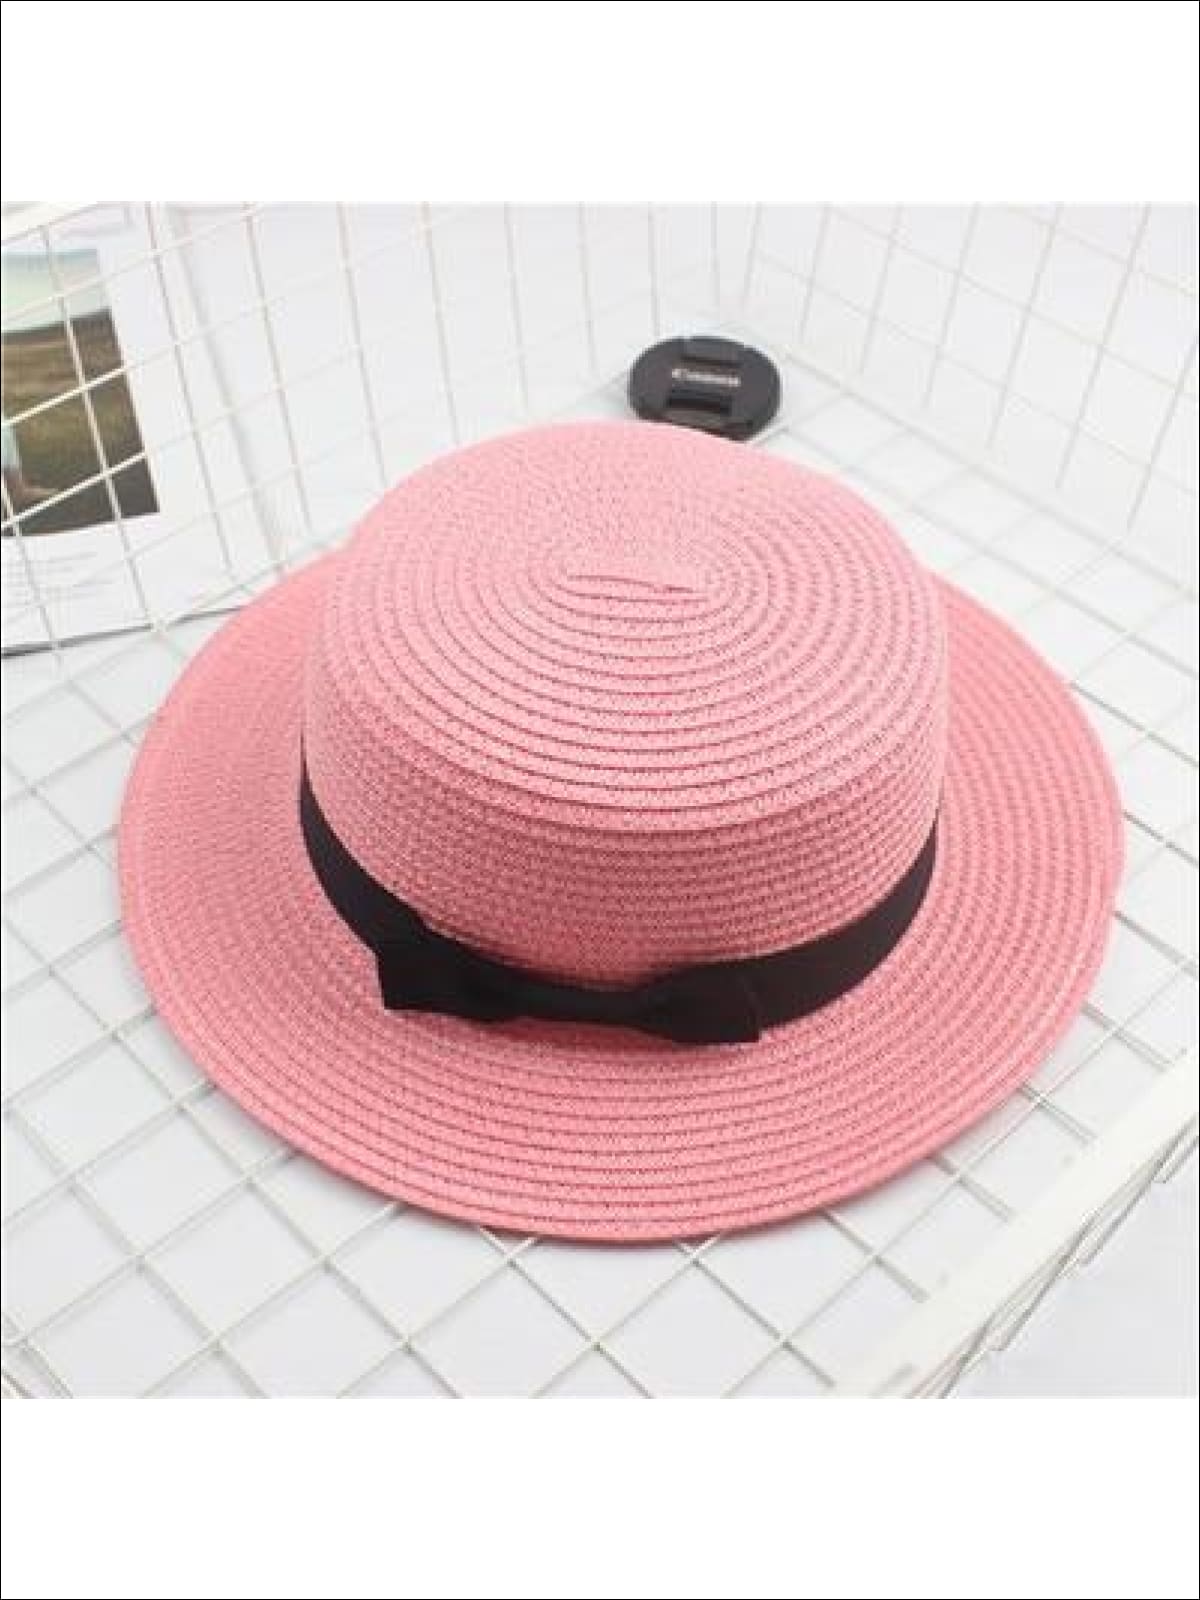 Girls Woven Straw Fedora Hat with Bow Tie (Multiple Color Options) - Light Pink / One Size - Girls Hats